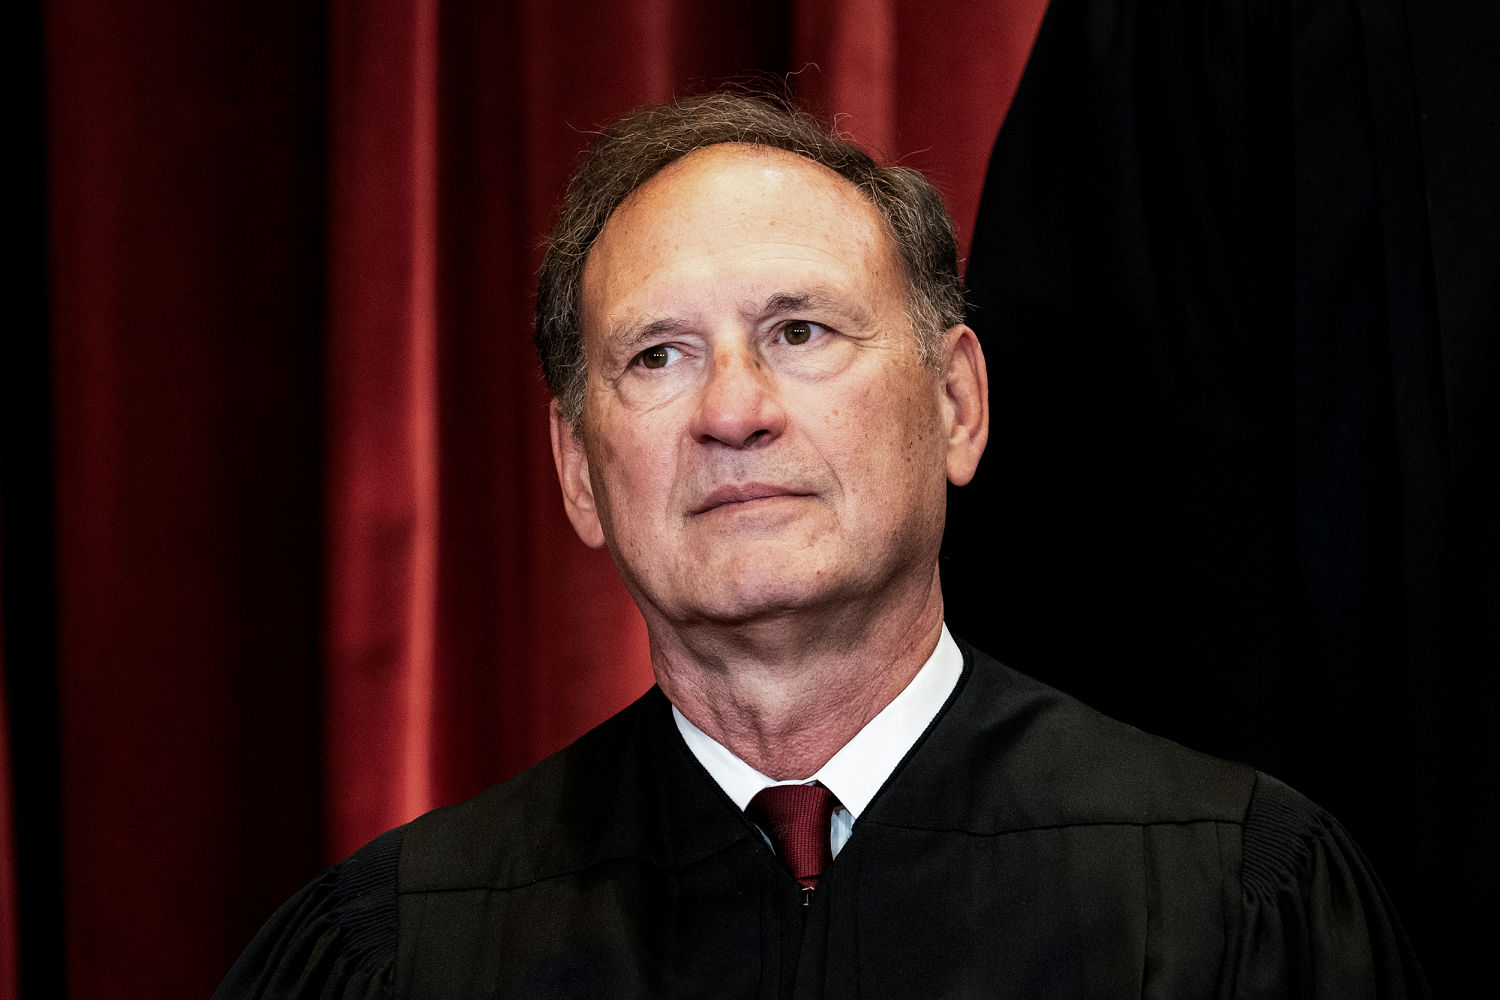 Trump, gun owners and Jan. 6 rioters: Tough-on-crime Justice Alito displays empathy for some criminal defendants